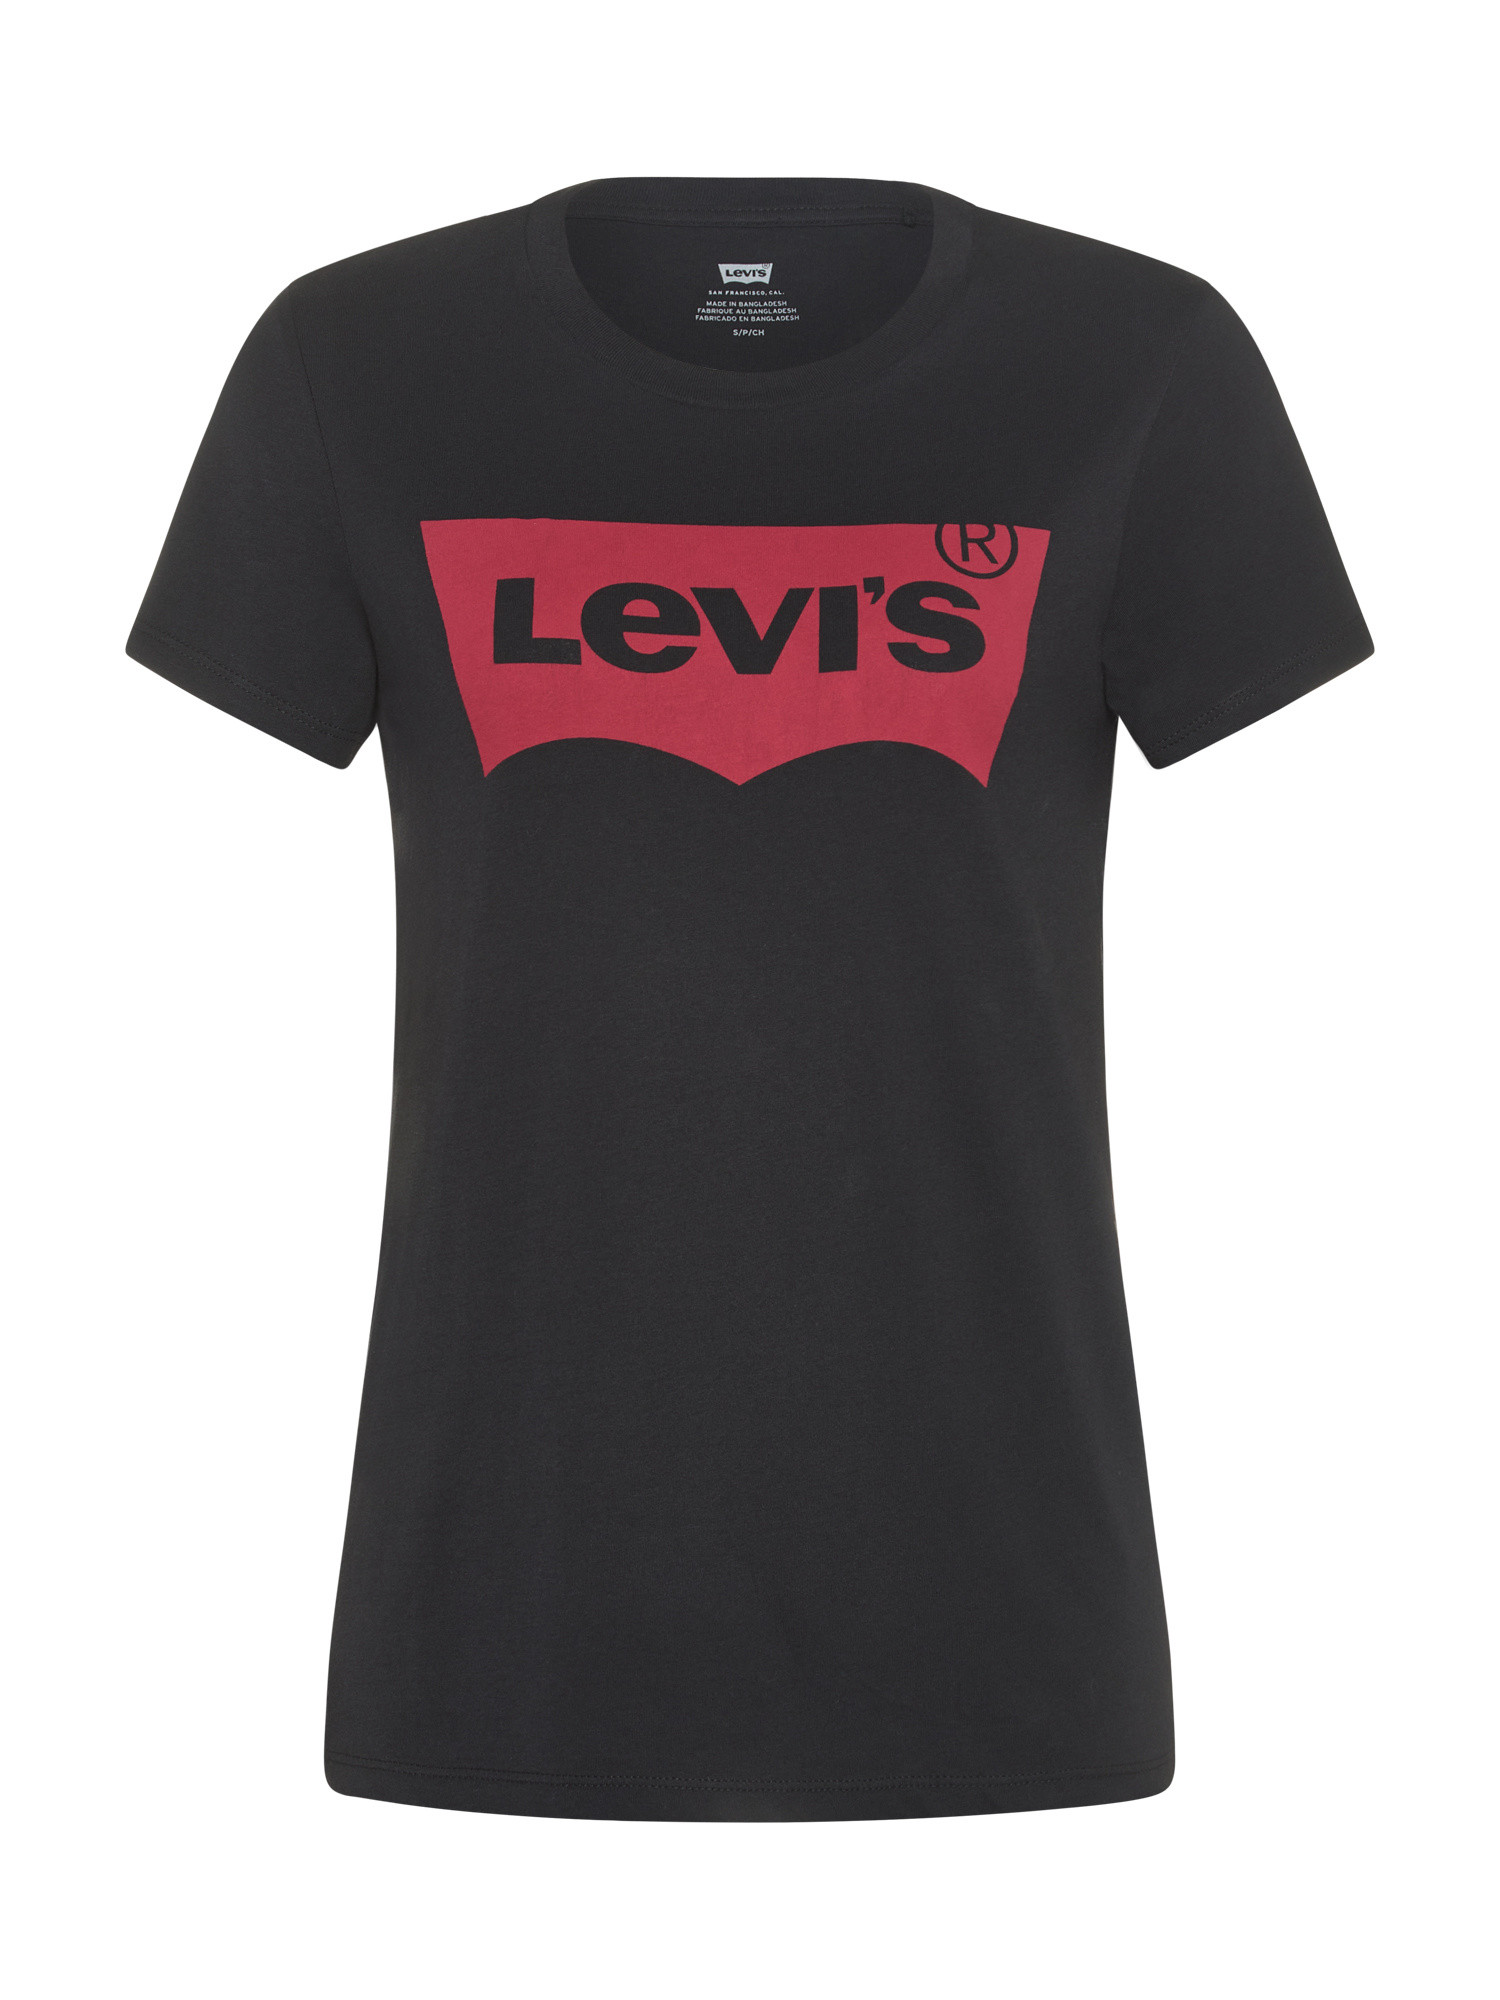 Levi's - T-shirt in cotone con stampa logo, Nero, large image number 0